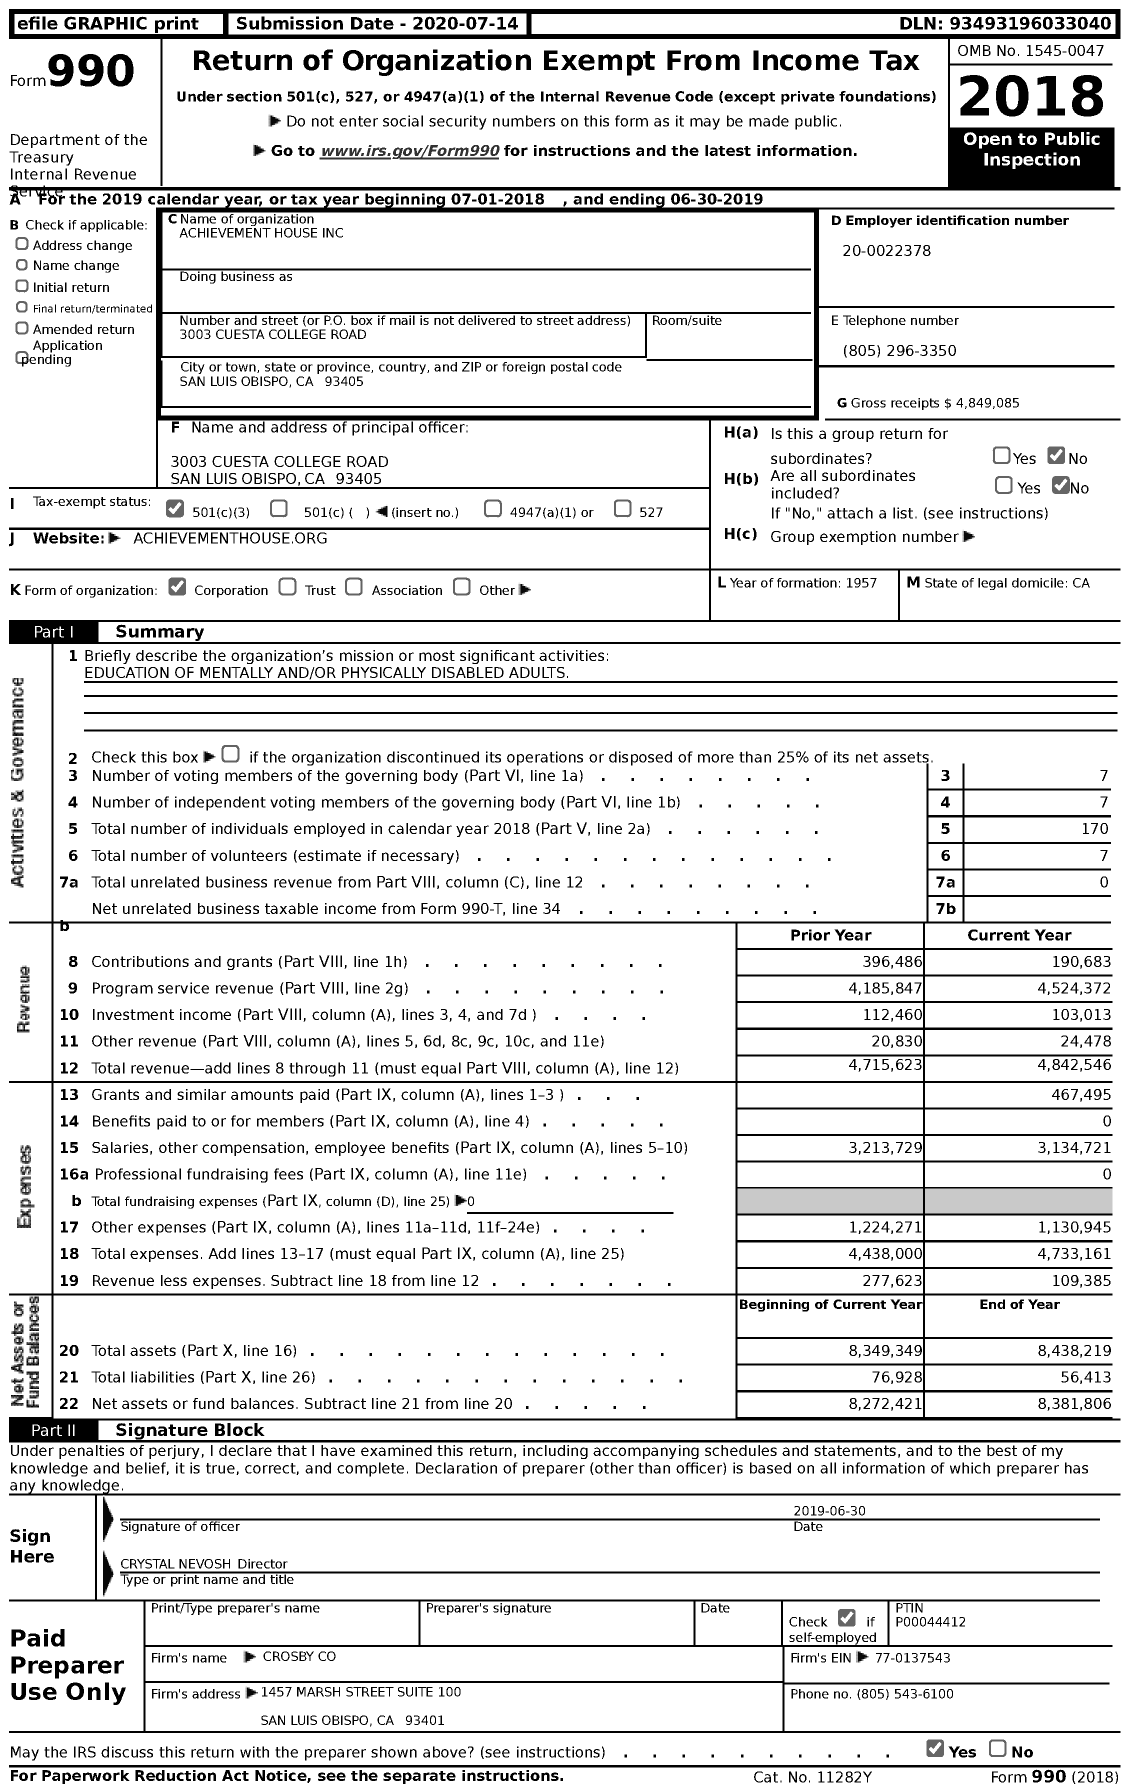 Image of first page of 2018 Form 990 for Achievement House Incorporated (AHI)